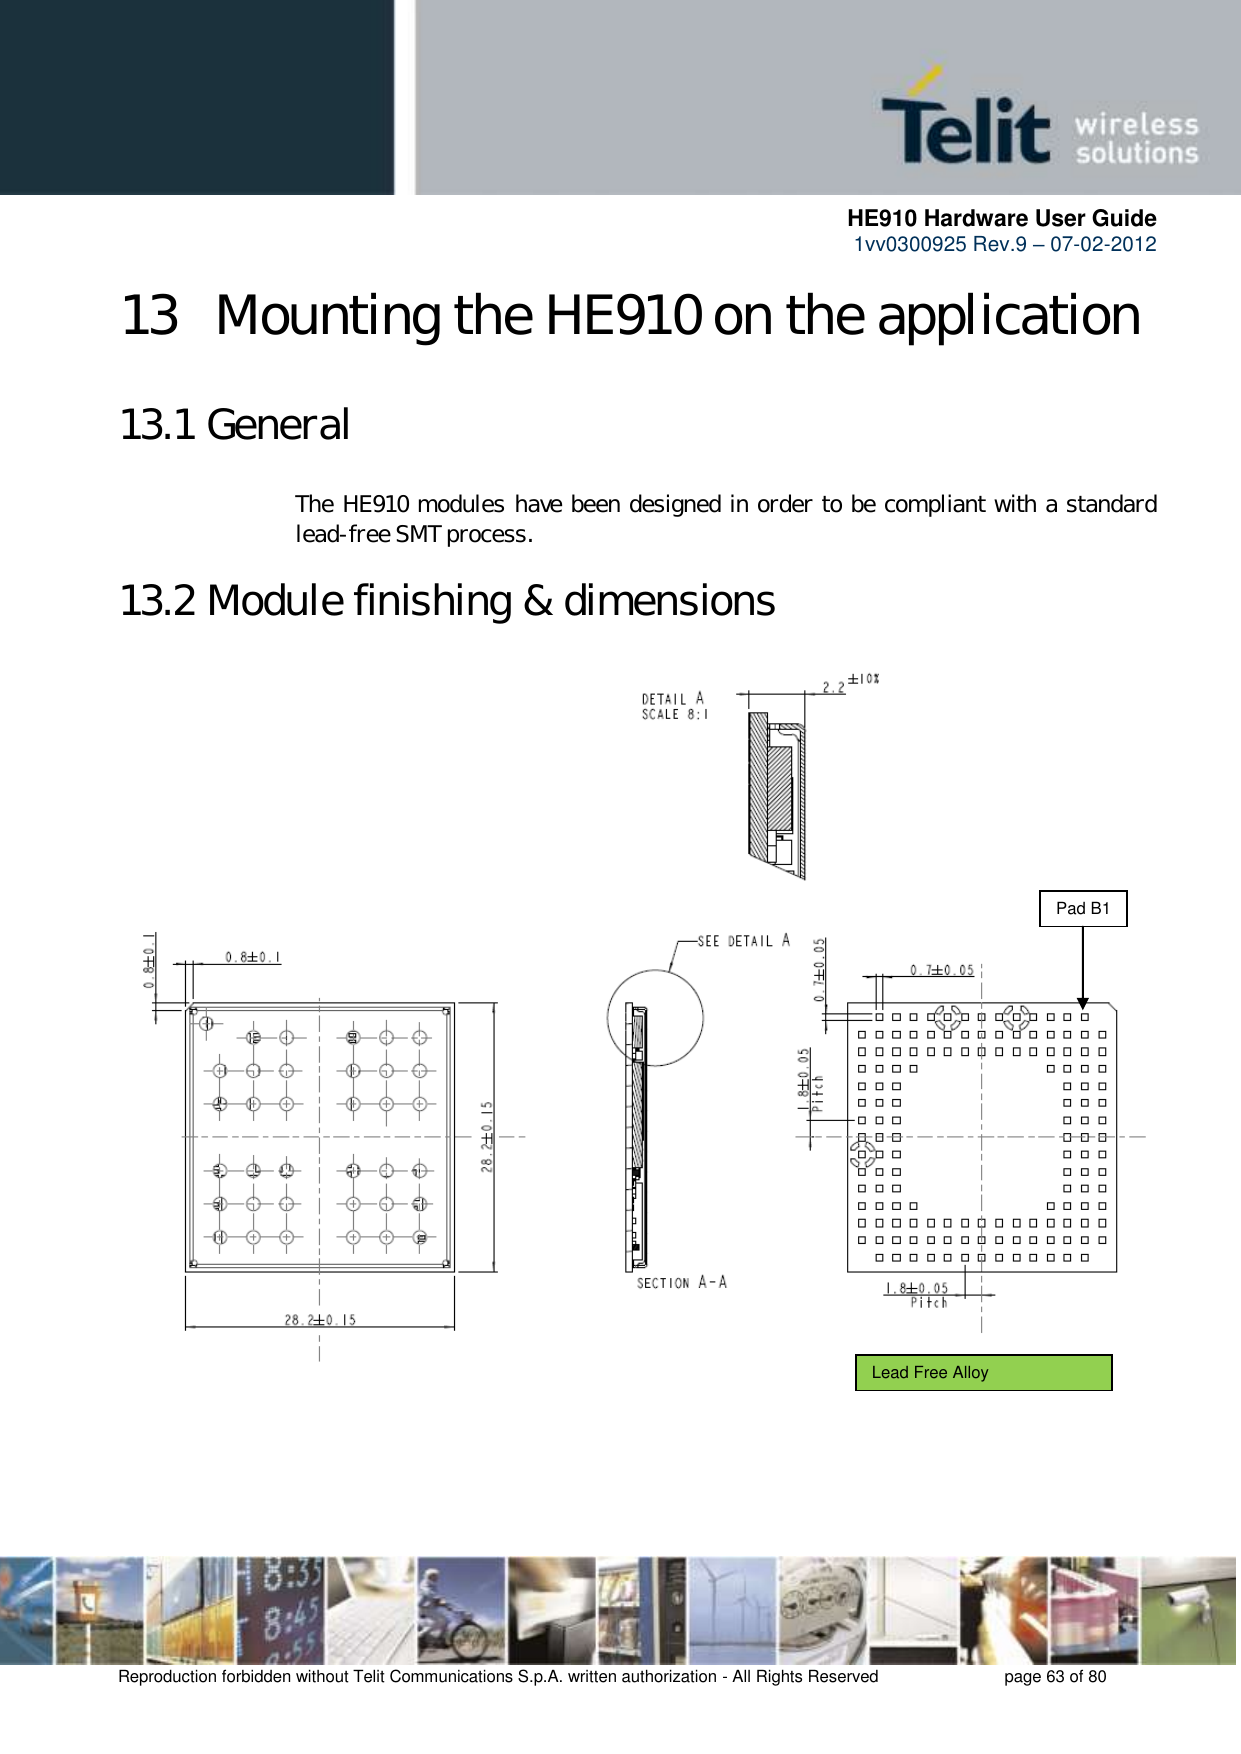      HE910 Hardware User Guide 1vv0300925 Rev.9 – 07-02-2012    Reproduction forbidden without Telit Communications S.p.A. written authorization - All Rights Reserved    page 63 of 80  13  Mounting the HE910 on the application 13.1 General The HE910 modules have been designed in order to be compliant with a standard lead-free SMT process. 13.2 Module finishing &amp; dimensions   Pad B1 Lead Free Alloy 